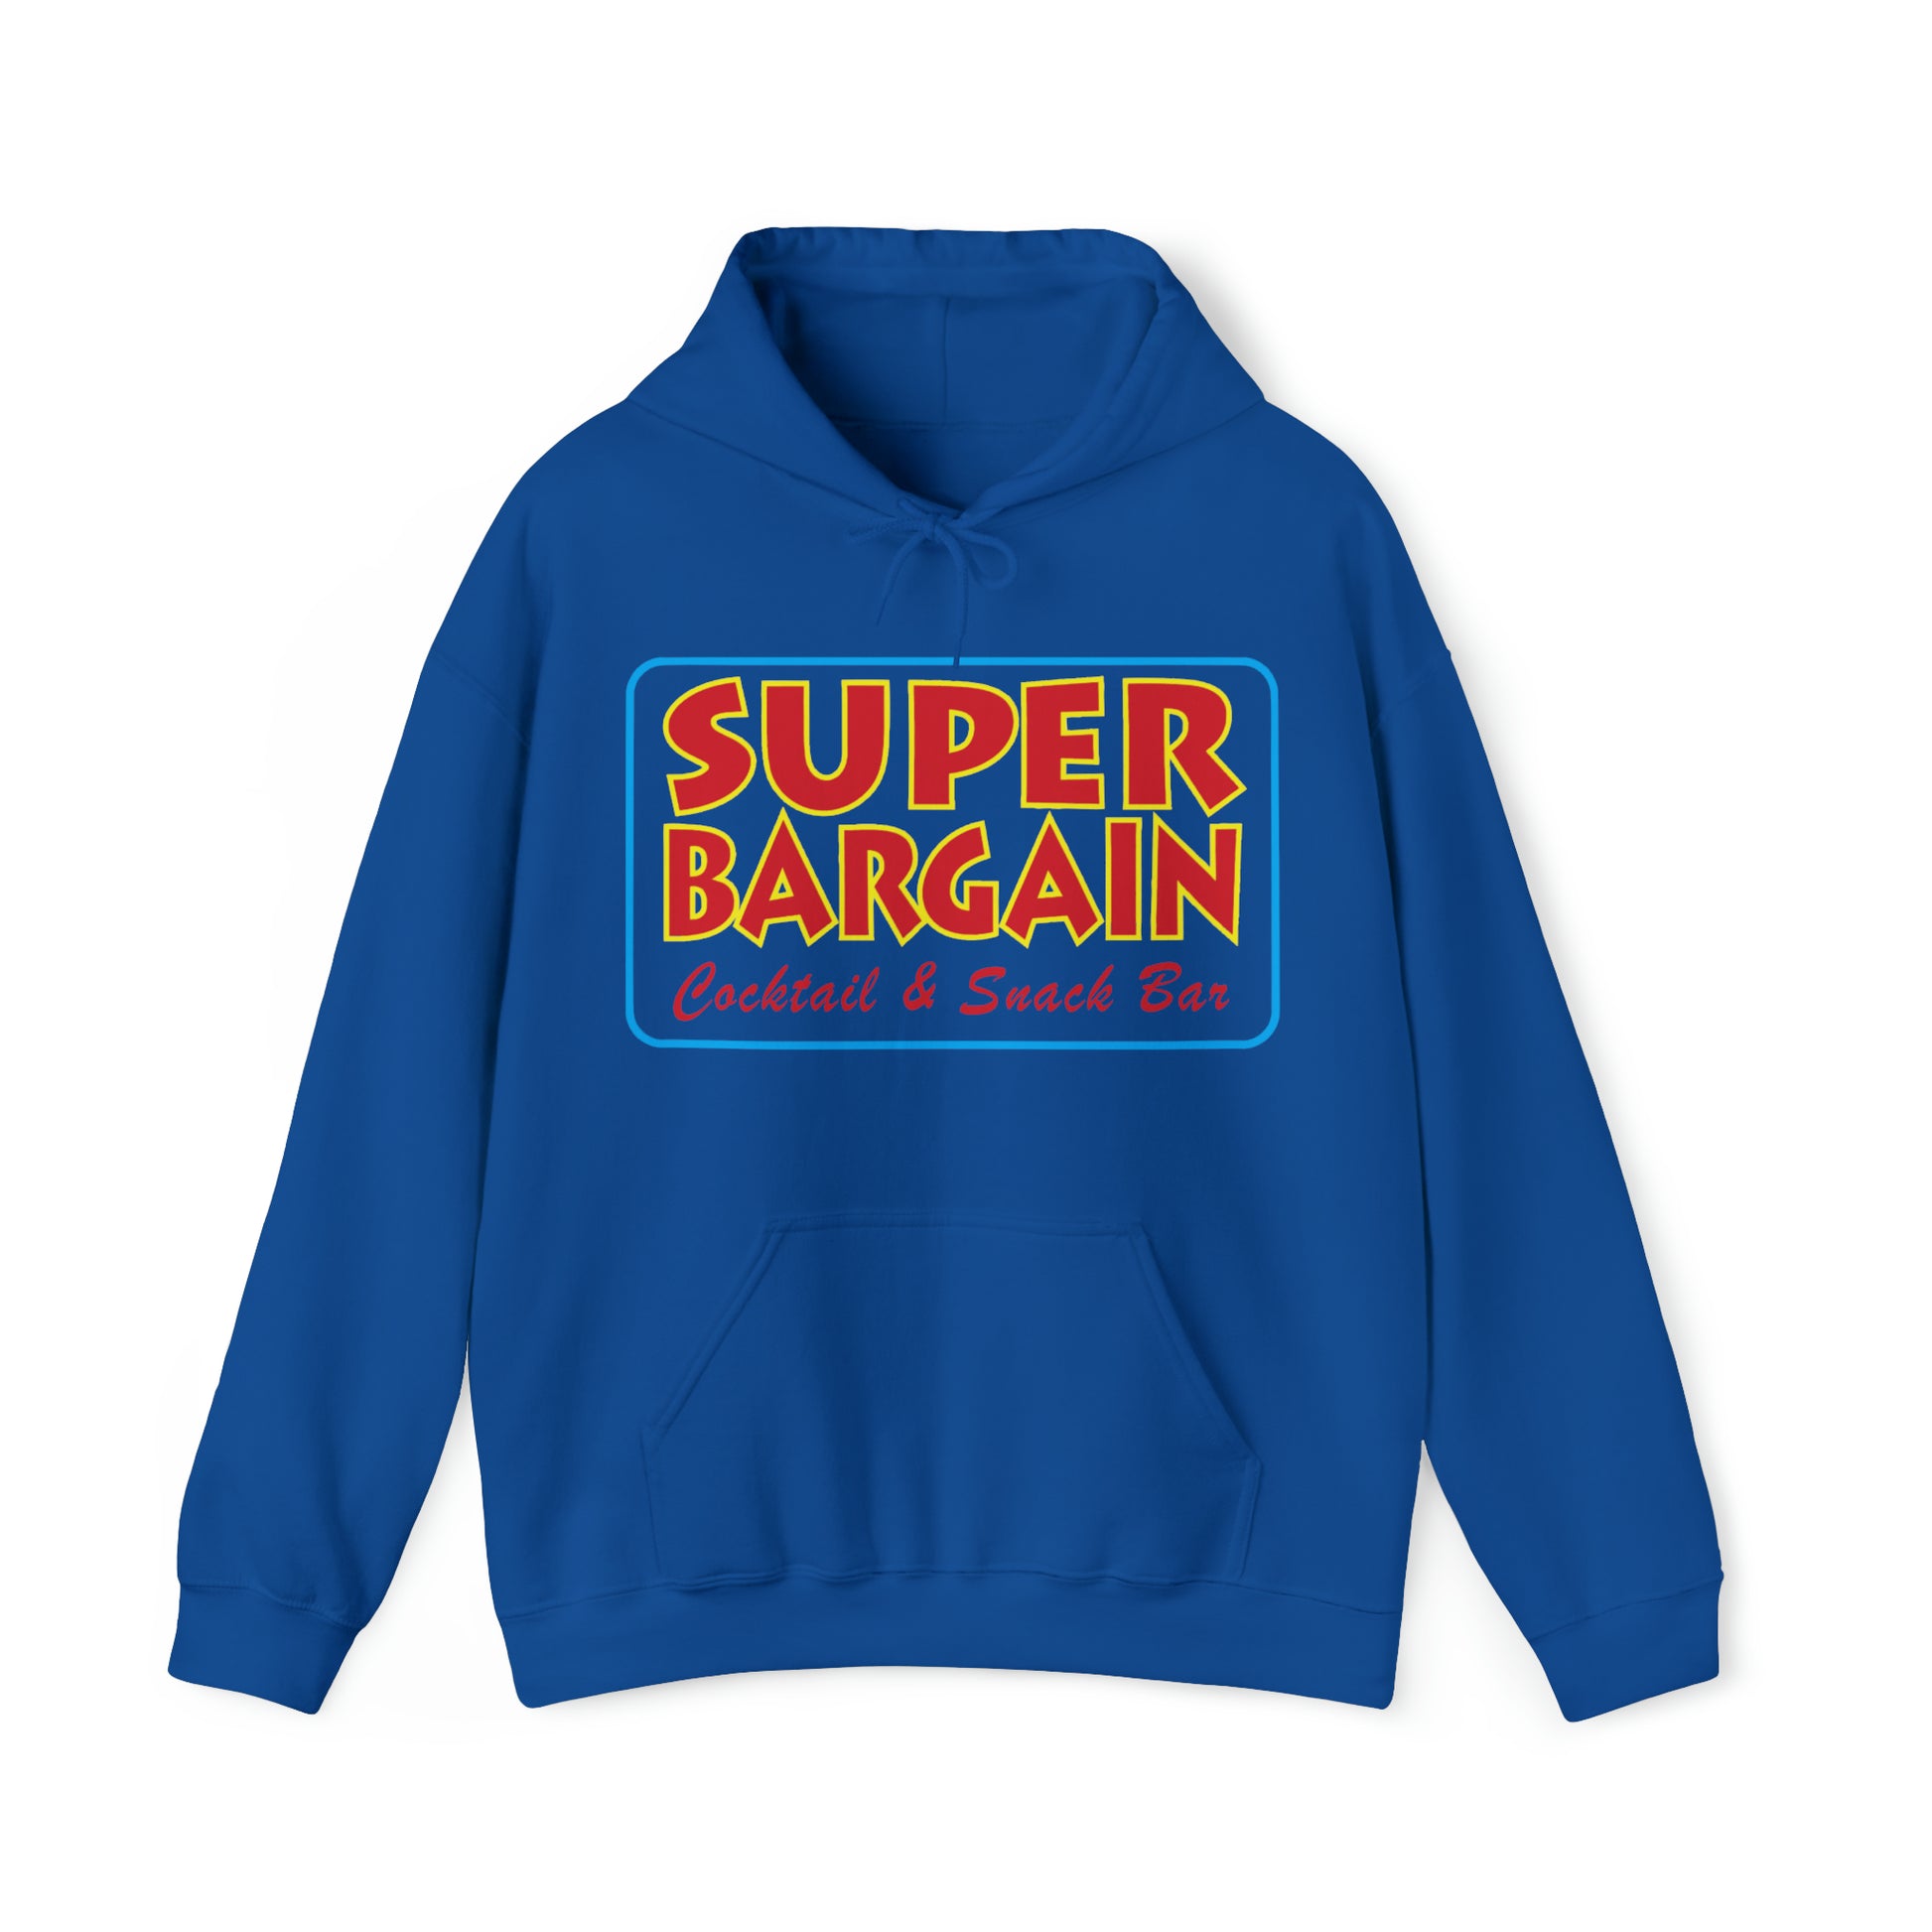 A royal blue Unisex Heavy Blend™ Hooded Sweatshirt with a graphic that reads "SUPER BARGAIN Cocktail & Snack Bar - Cabbagetown, Toronto" in colorful, bold lettering across the front.